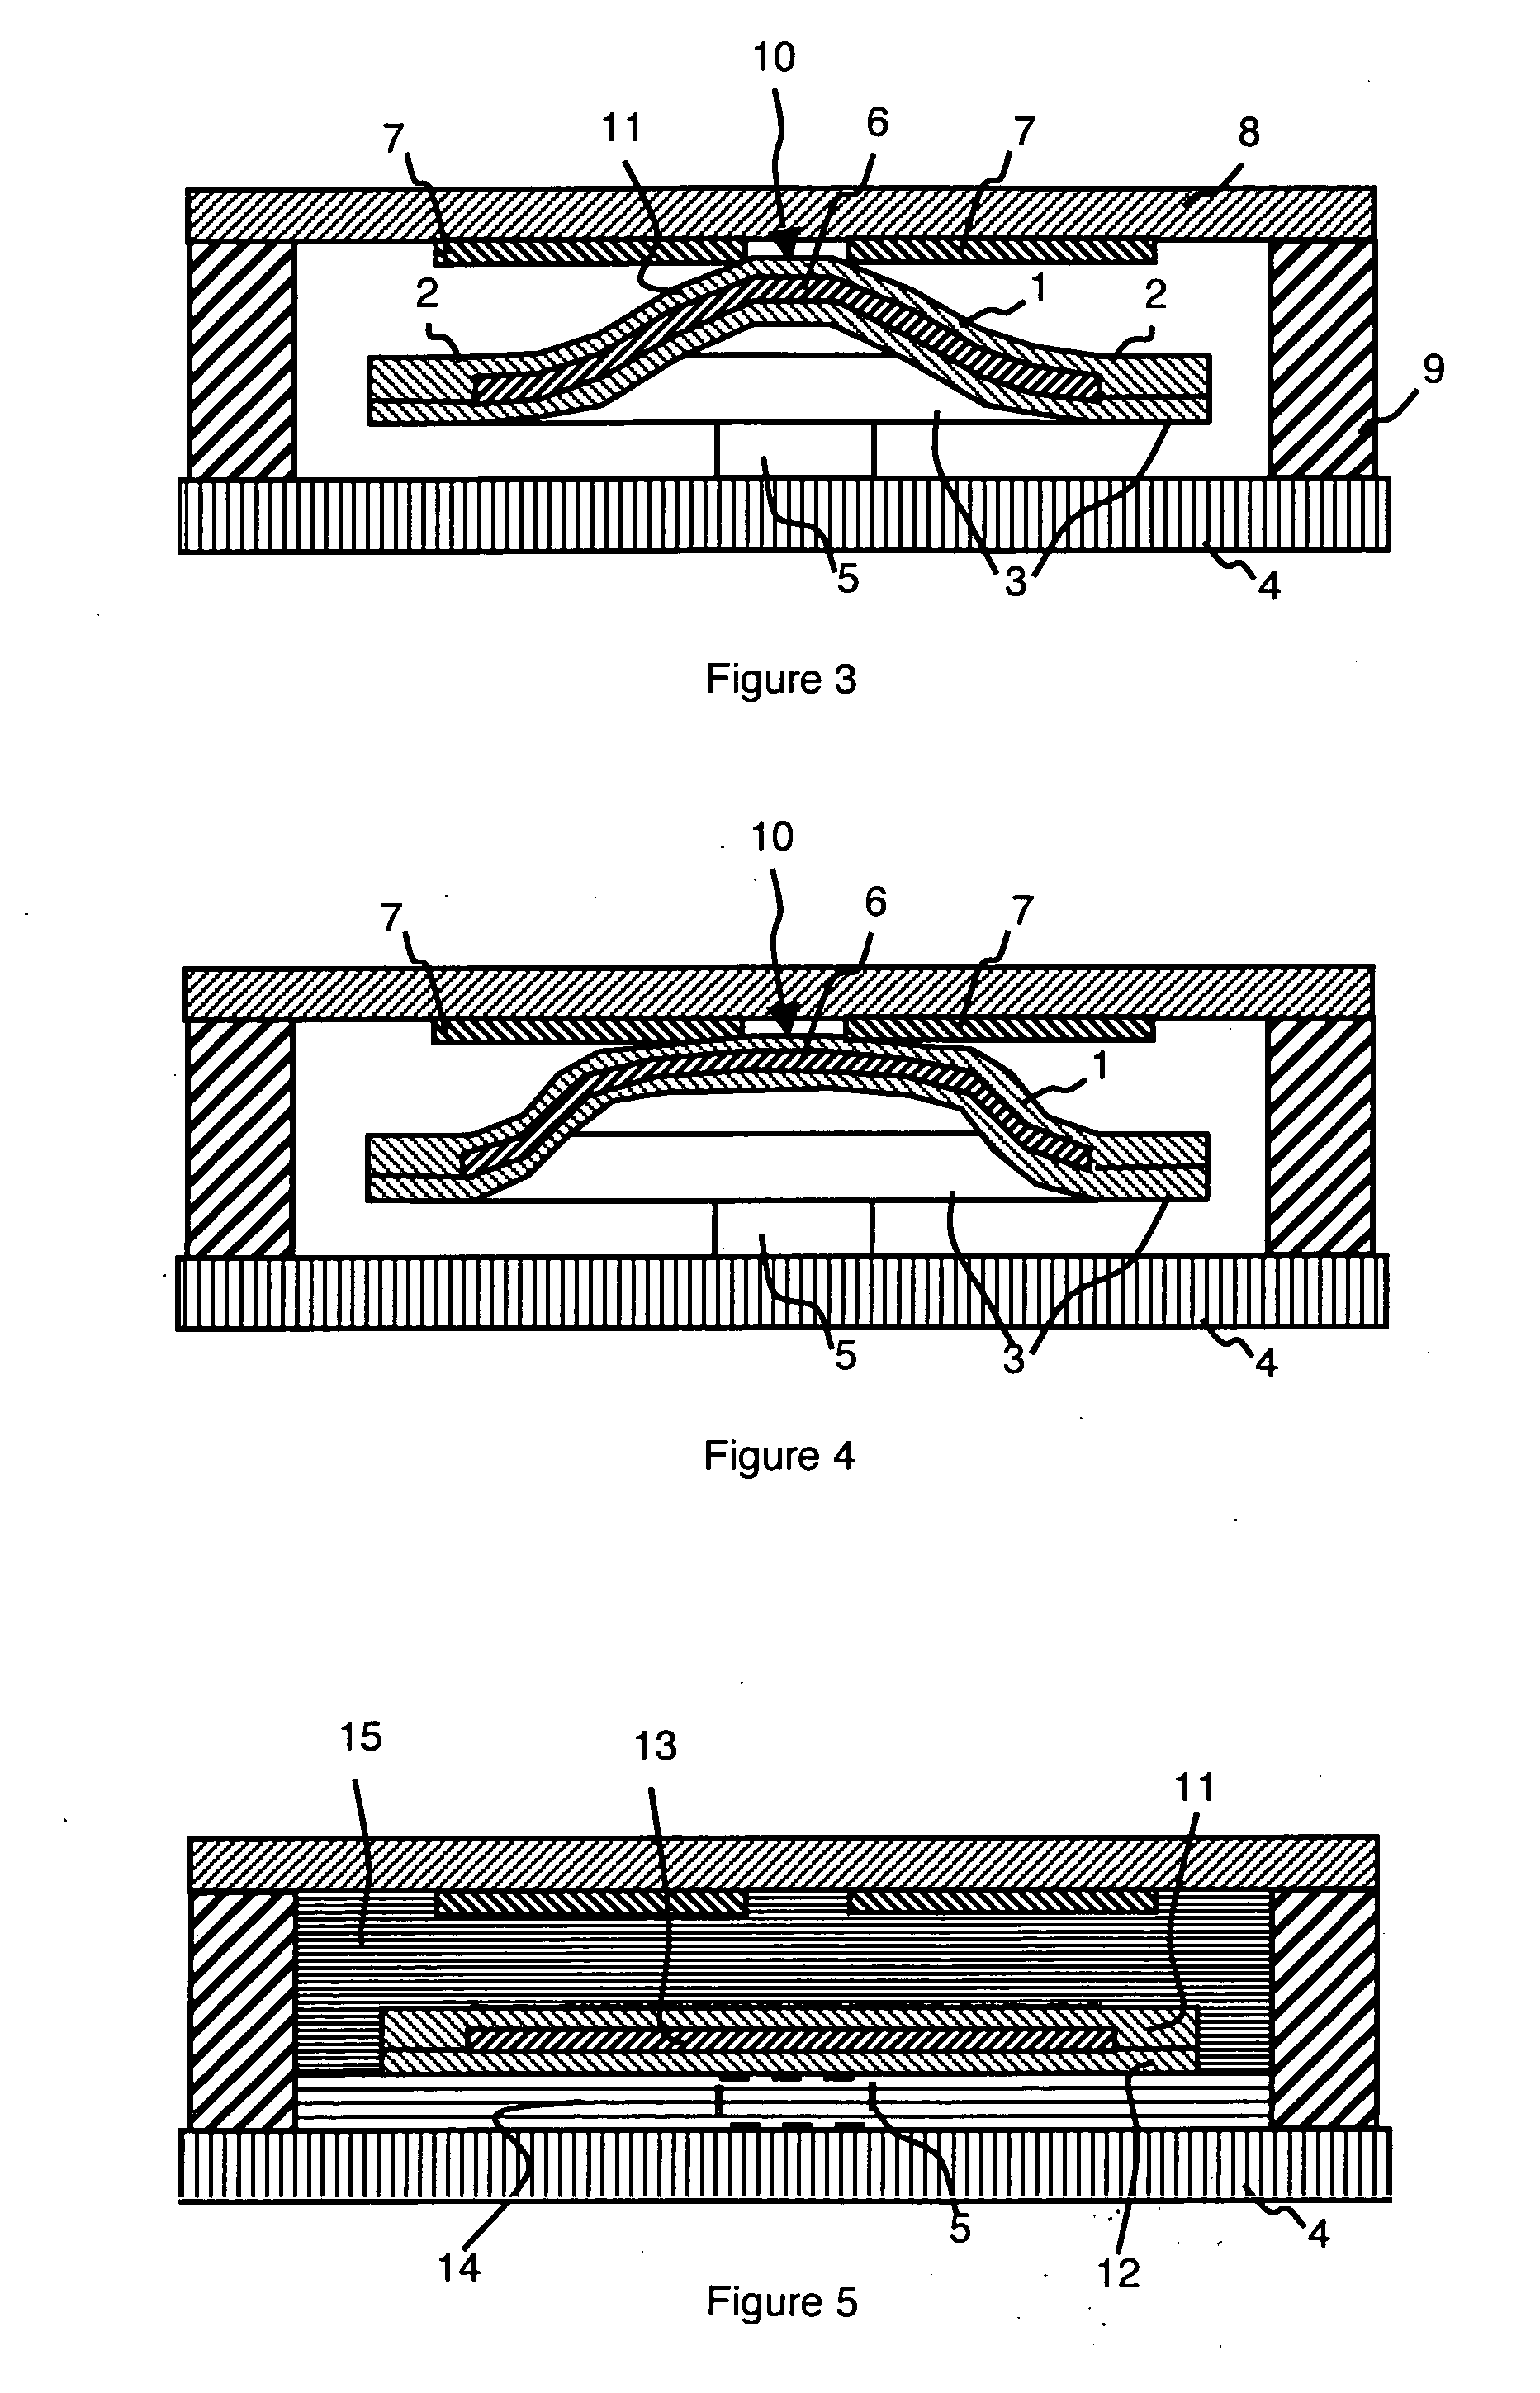 Variable-capacitance electromechanical micro-capacitor and method for producing such a micro-capacitor